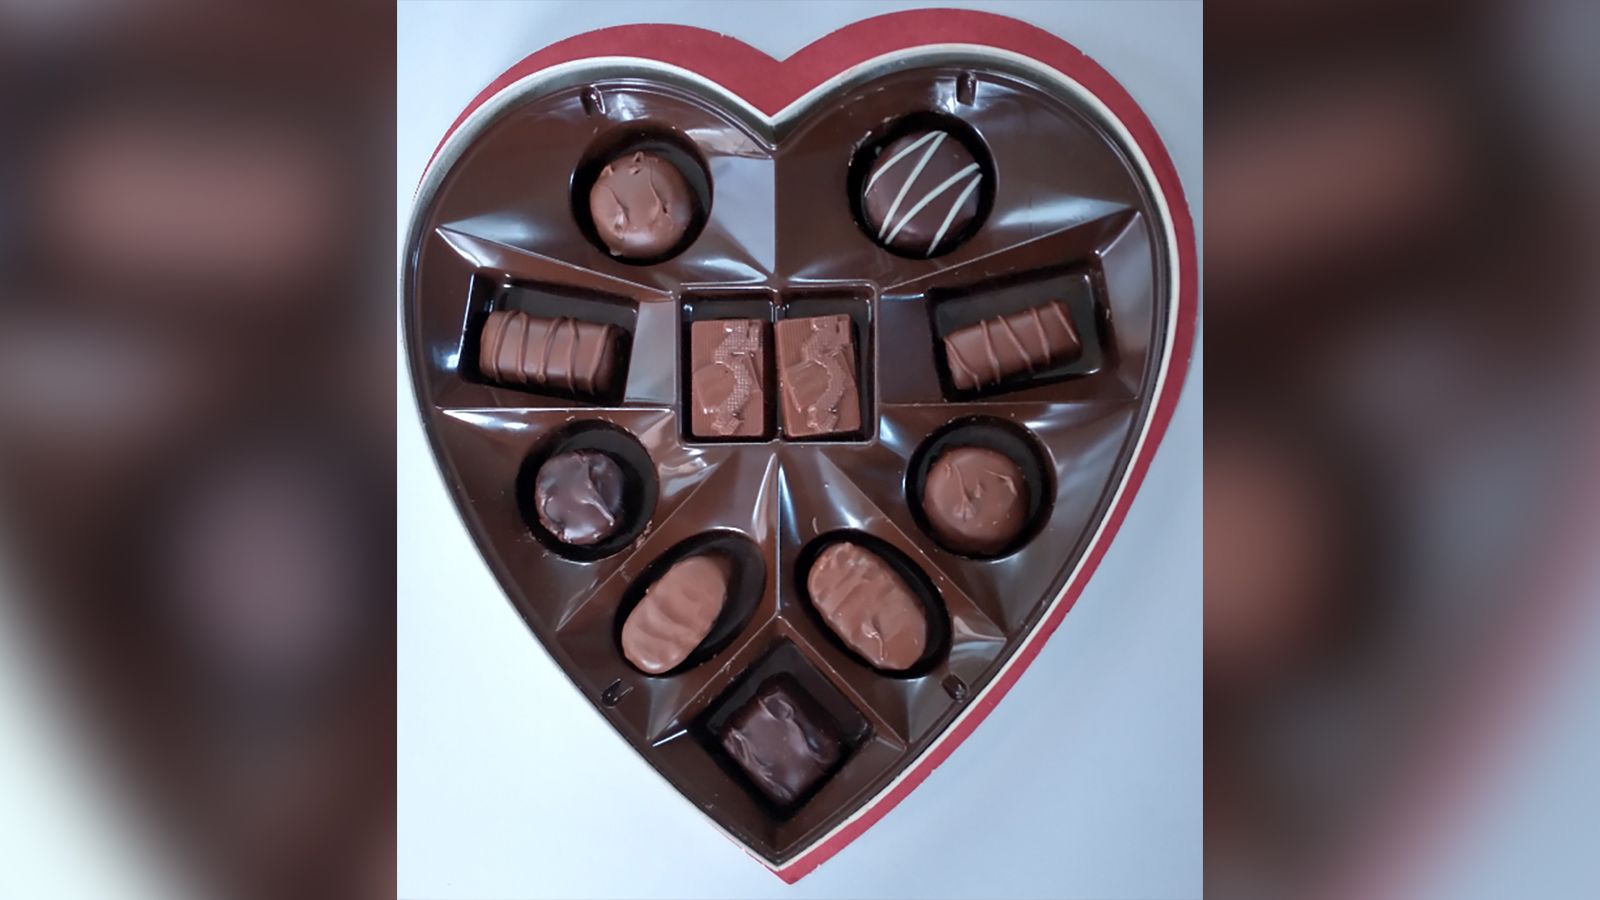 Shop Valentine's Day Packaging: Heart Shaped Candy Boxes + More